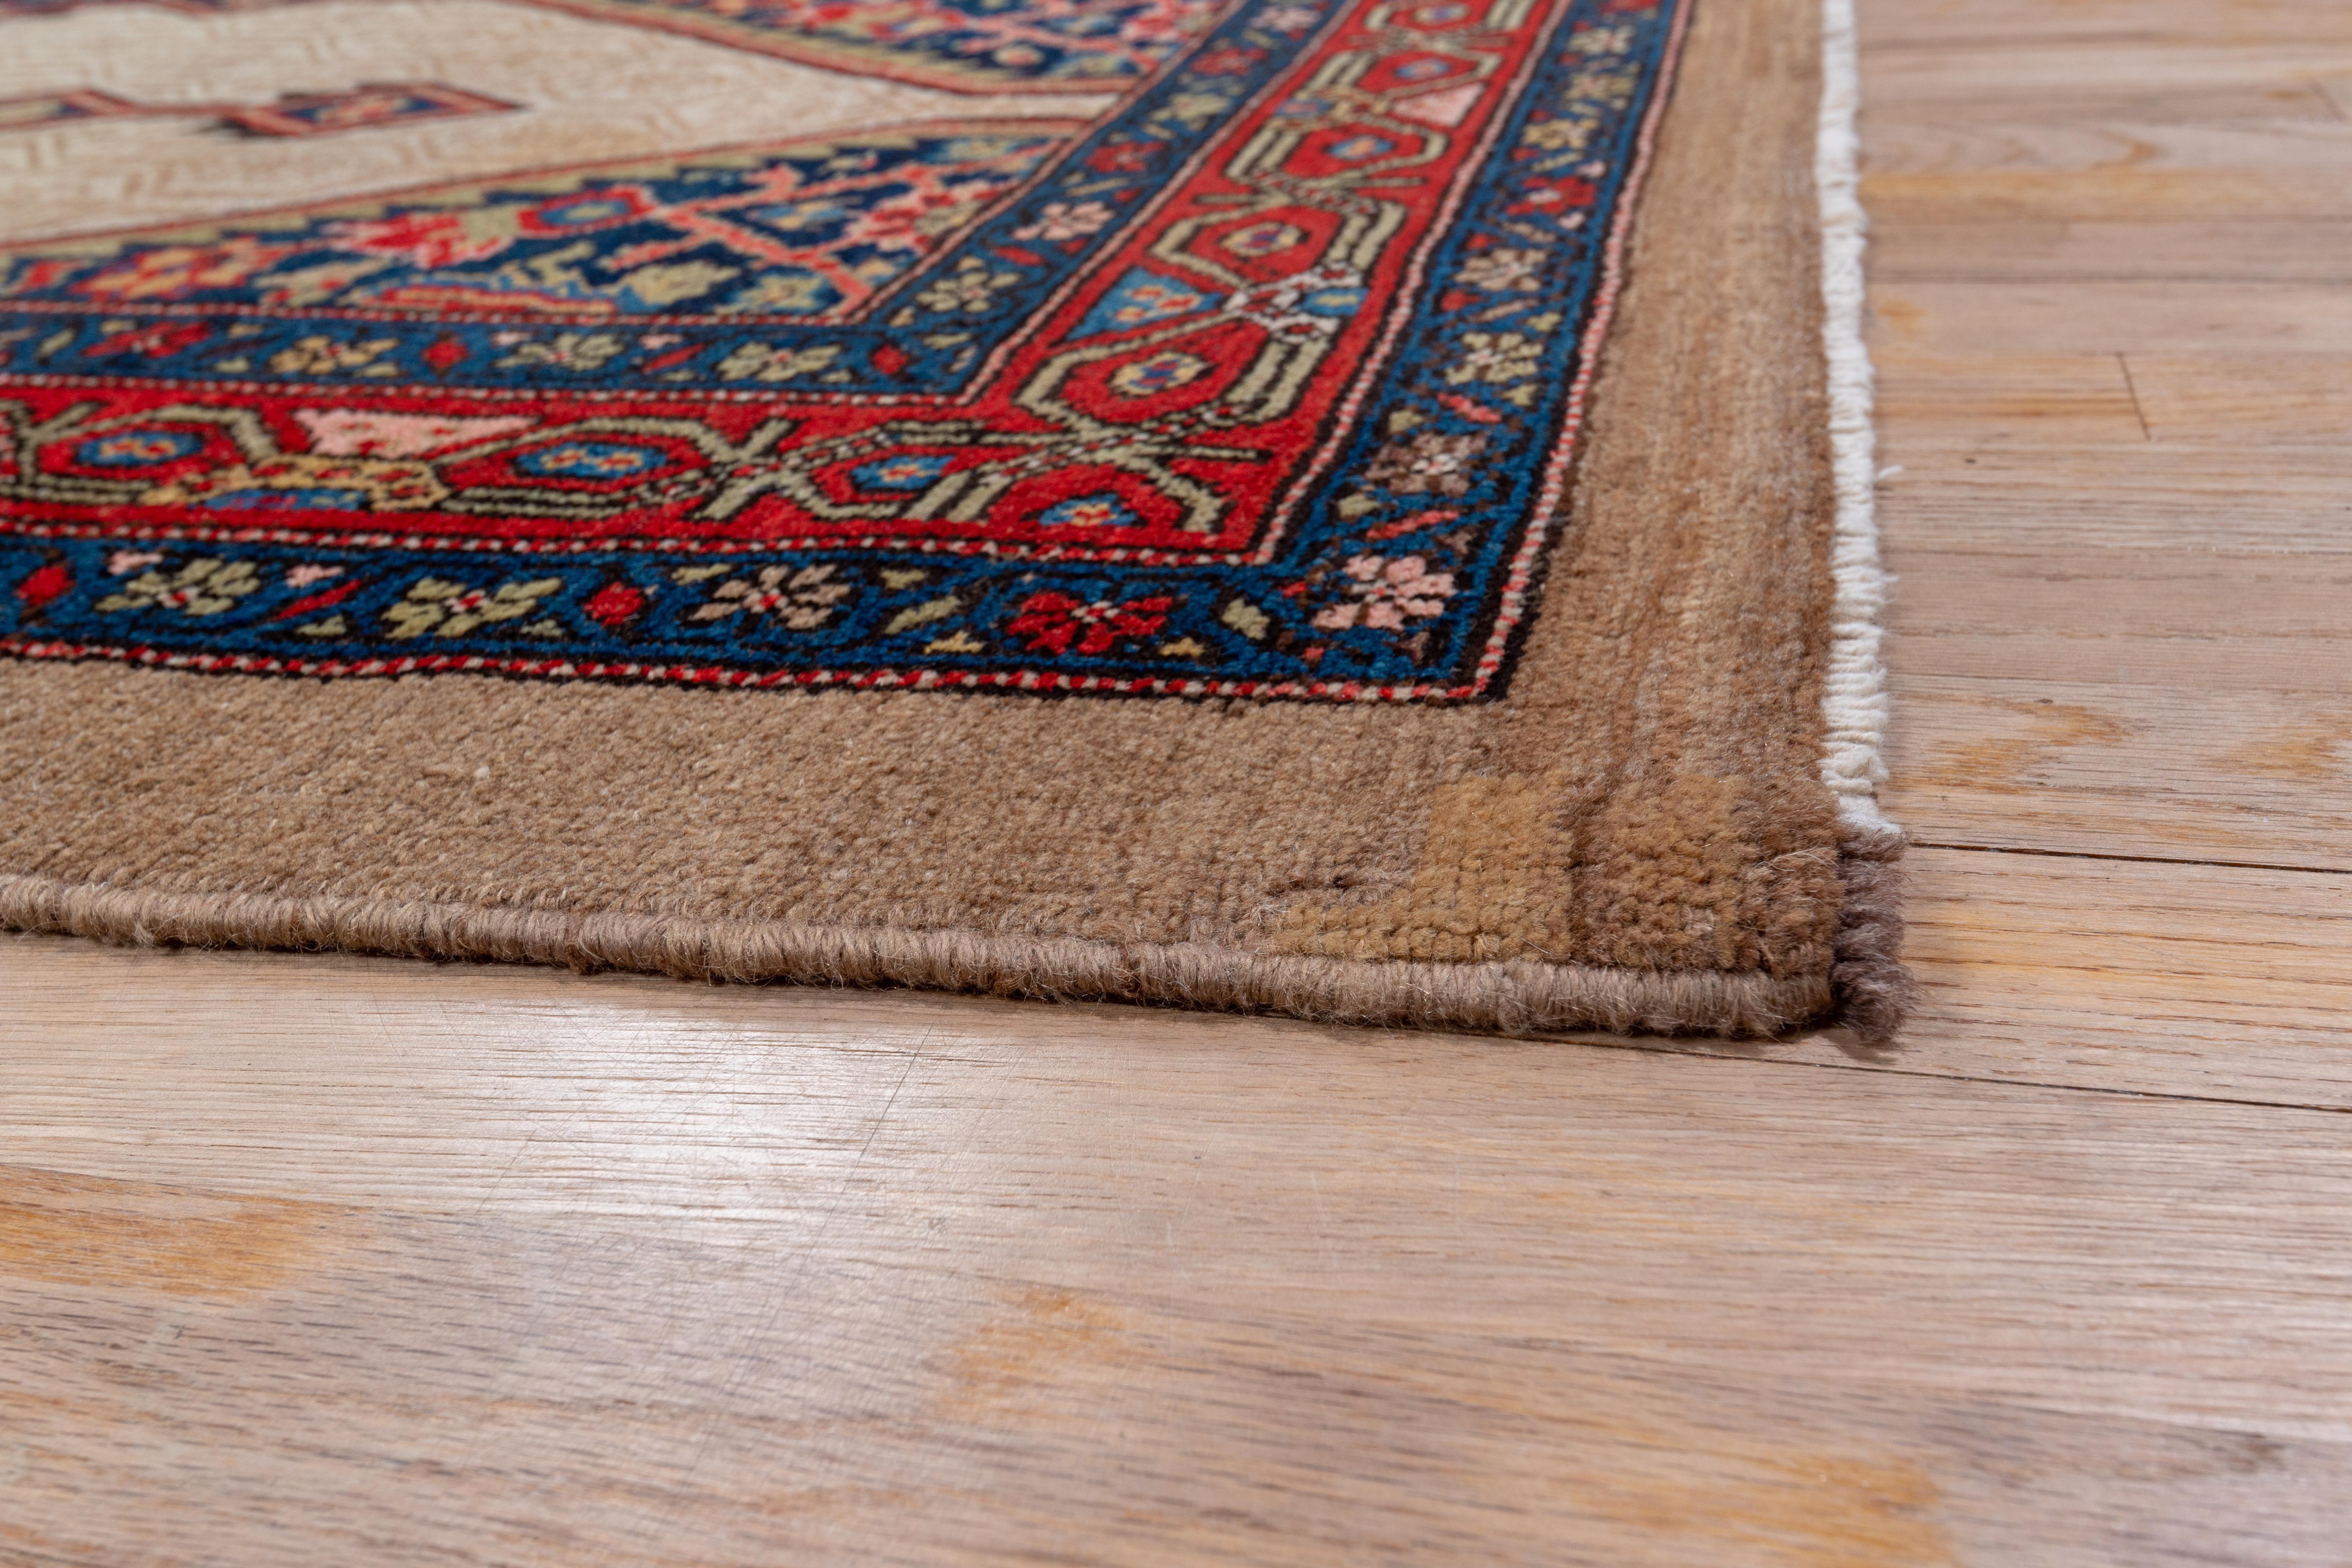 Early 20th Century Antique Persian Camel Hair Hamadan Runner, circa 1910s, Blue & Red Palette For Sale